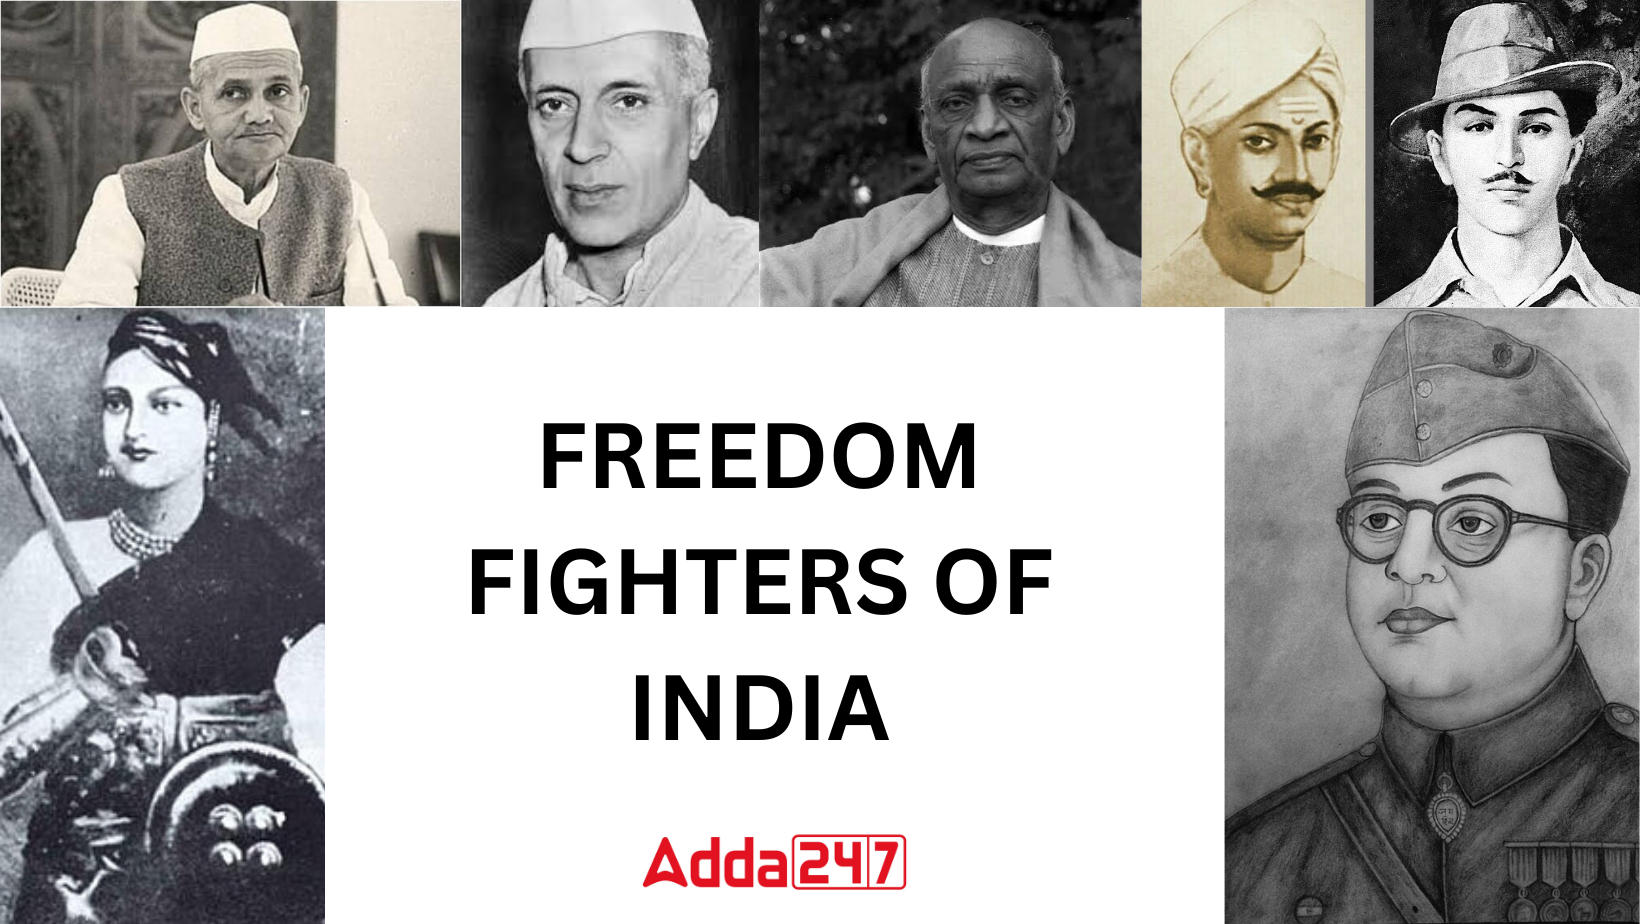 Freedom Fighters of India Names List, Images & Their Contribution